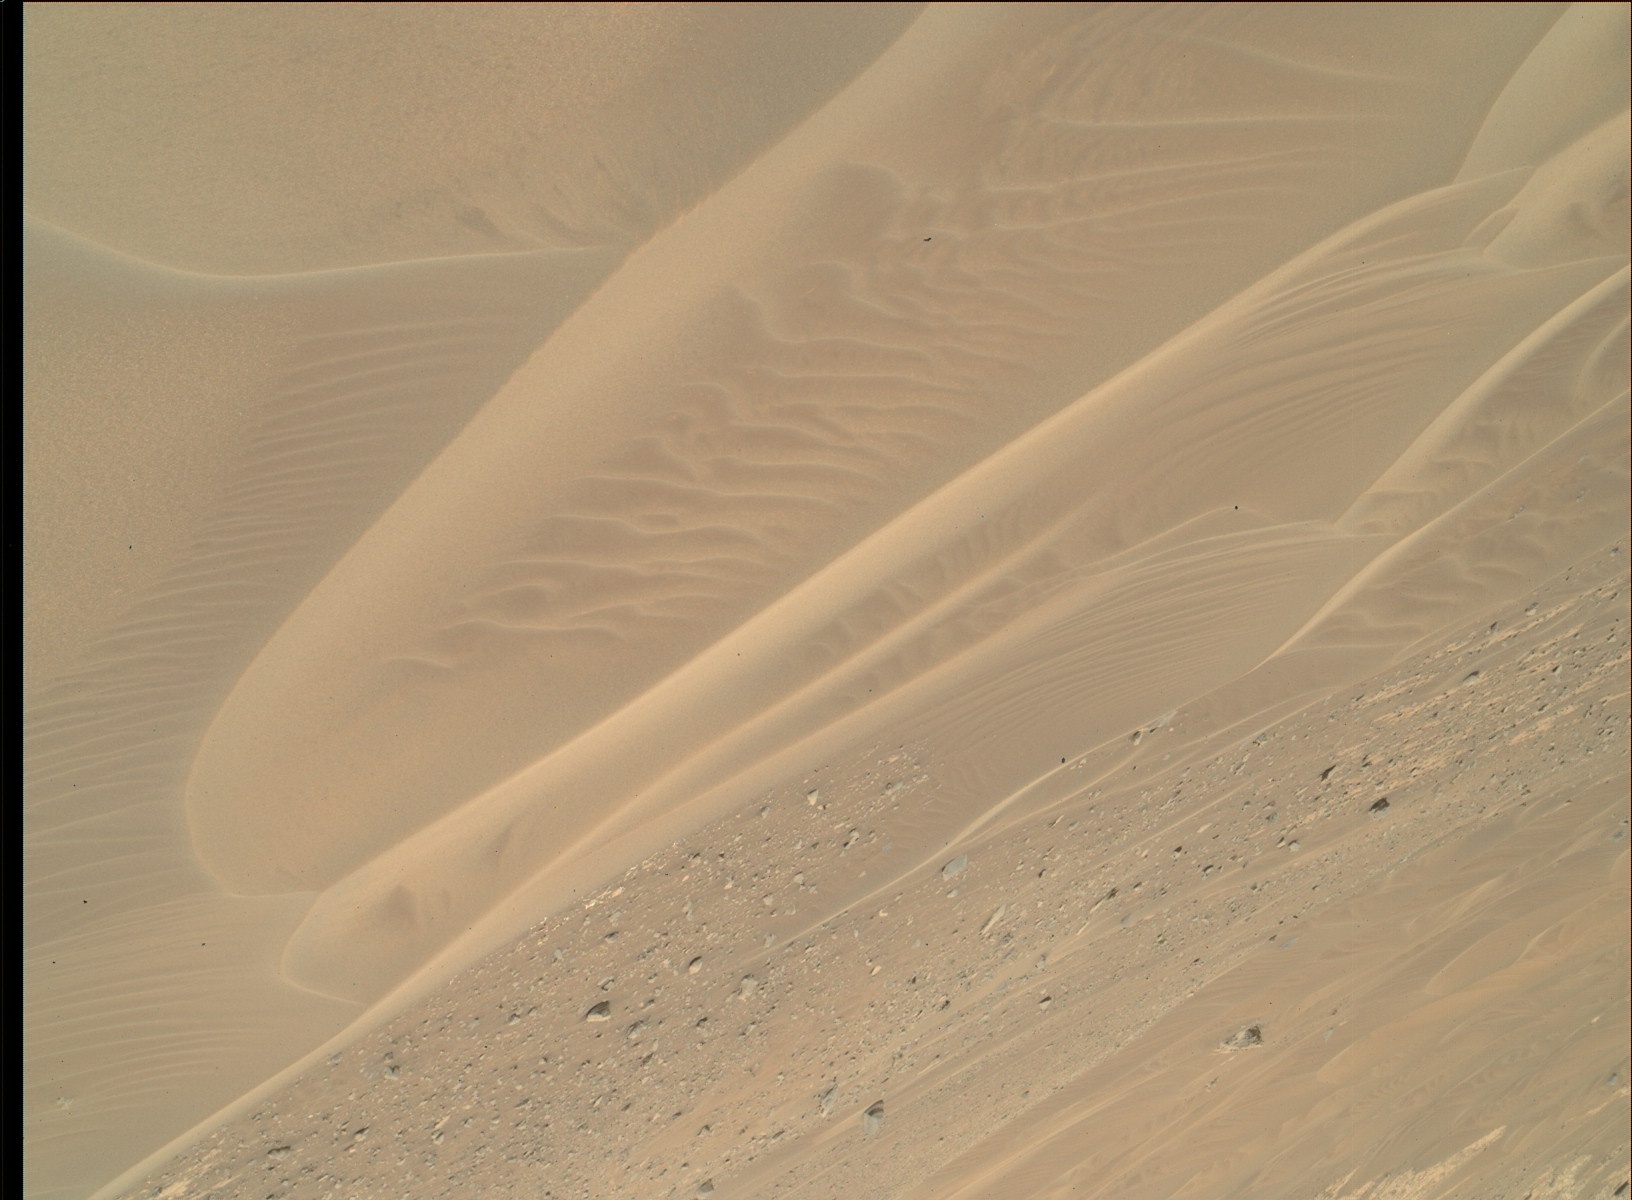 Nasa's Mars rover Curiosity acquired this image using its Mars Hand Lens Imager (MAHLI) on Sol 984